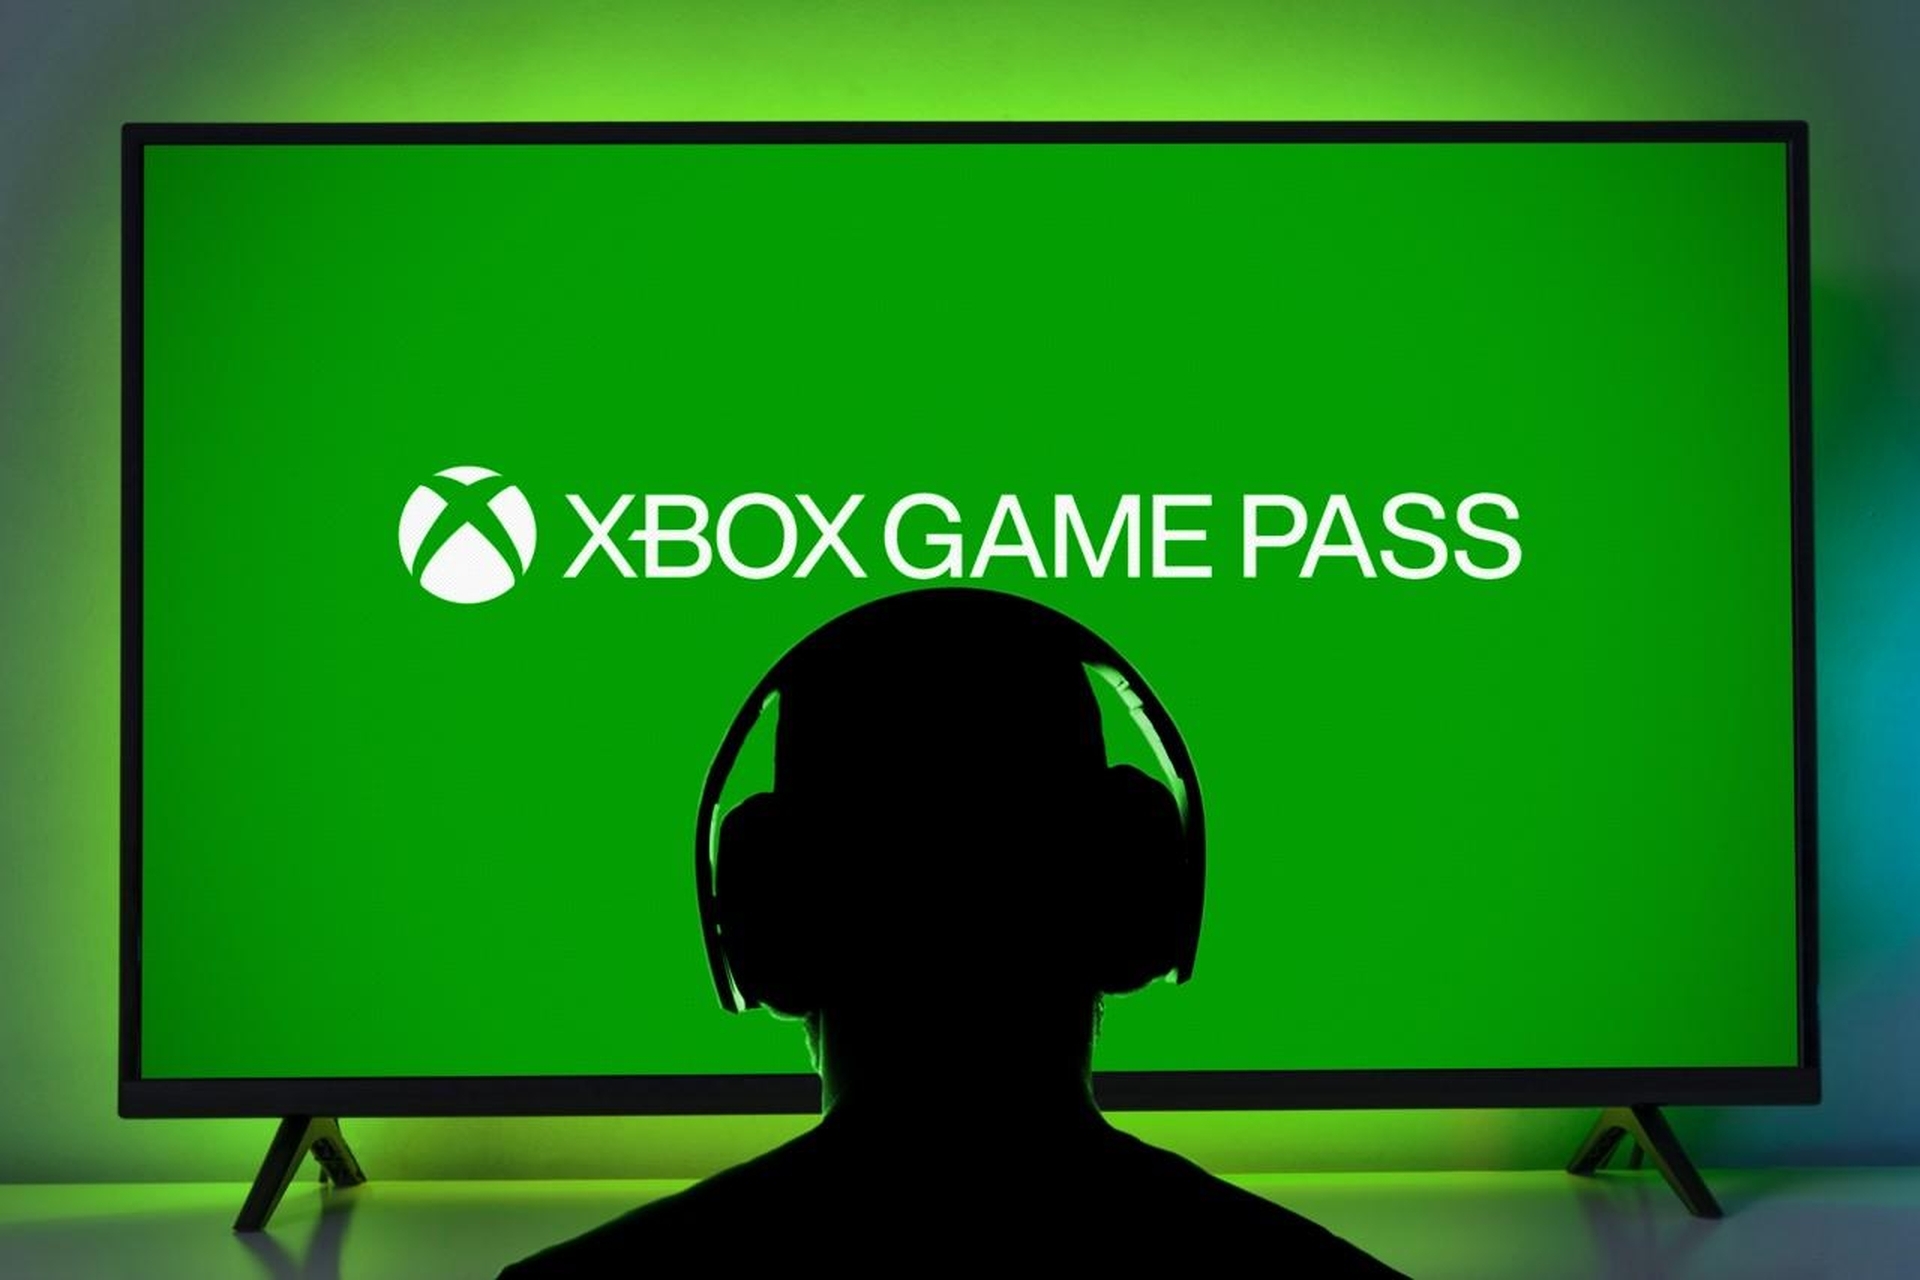 Today, we are going to be covering the Xbox Game Pass family plan, which is currently being tested by Microsoft and will make it easier to share subscriptions.